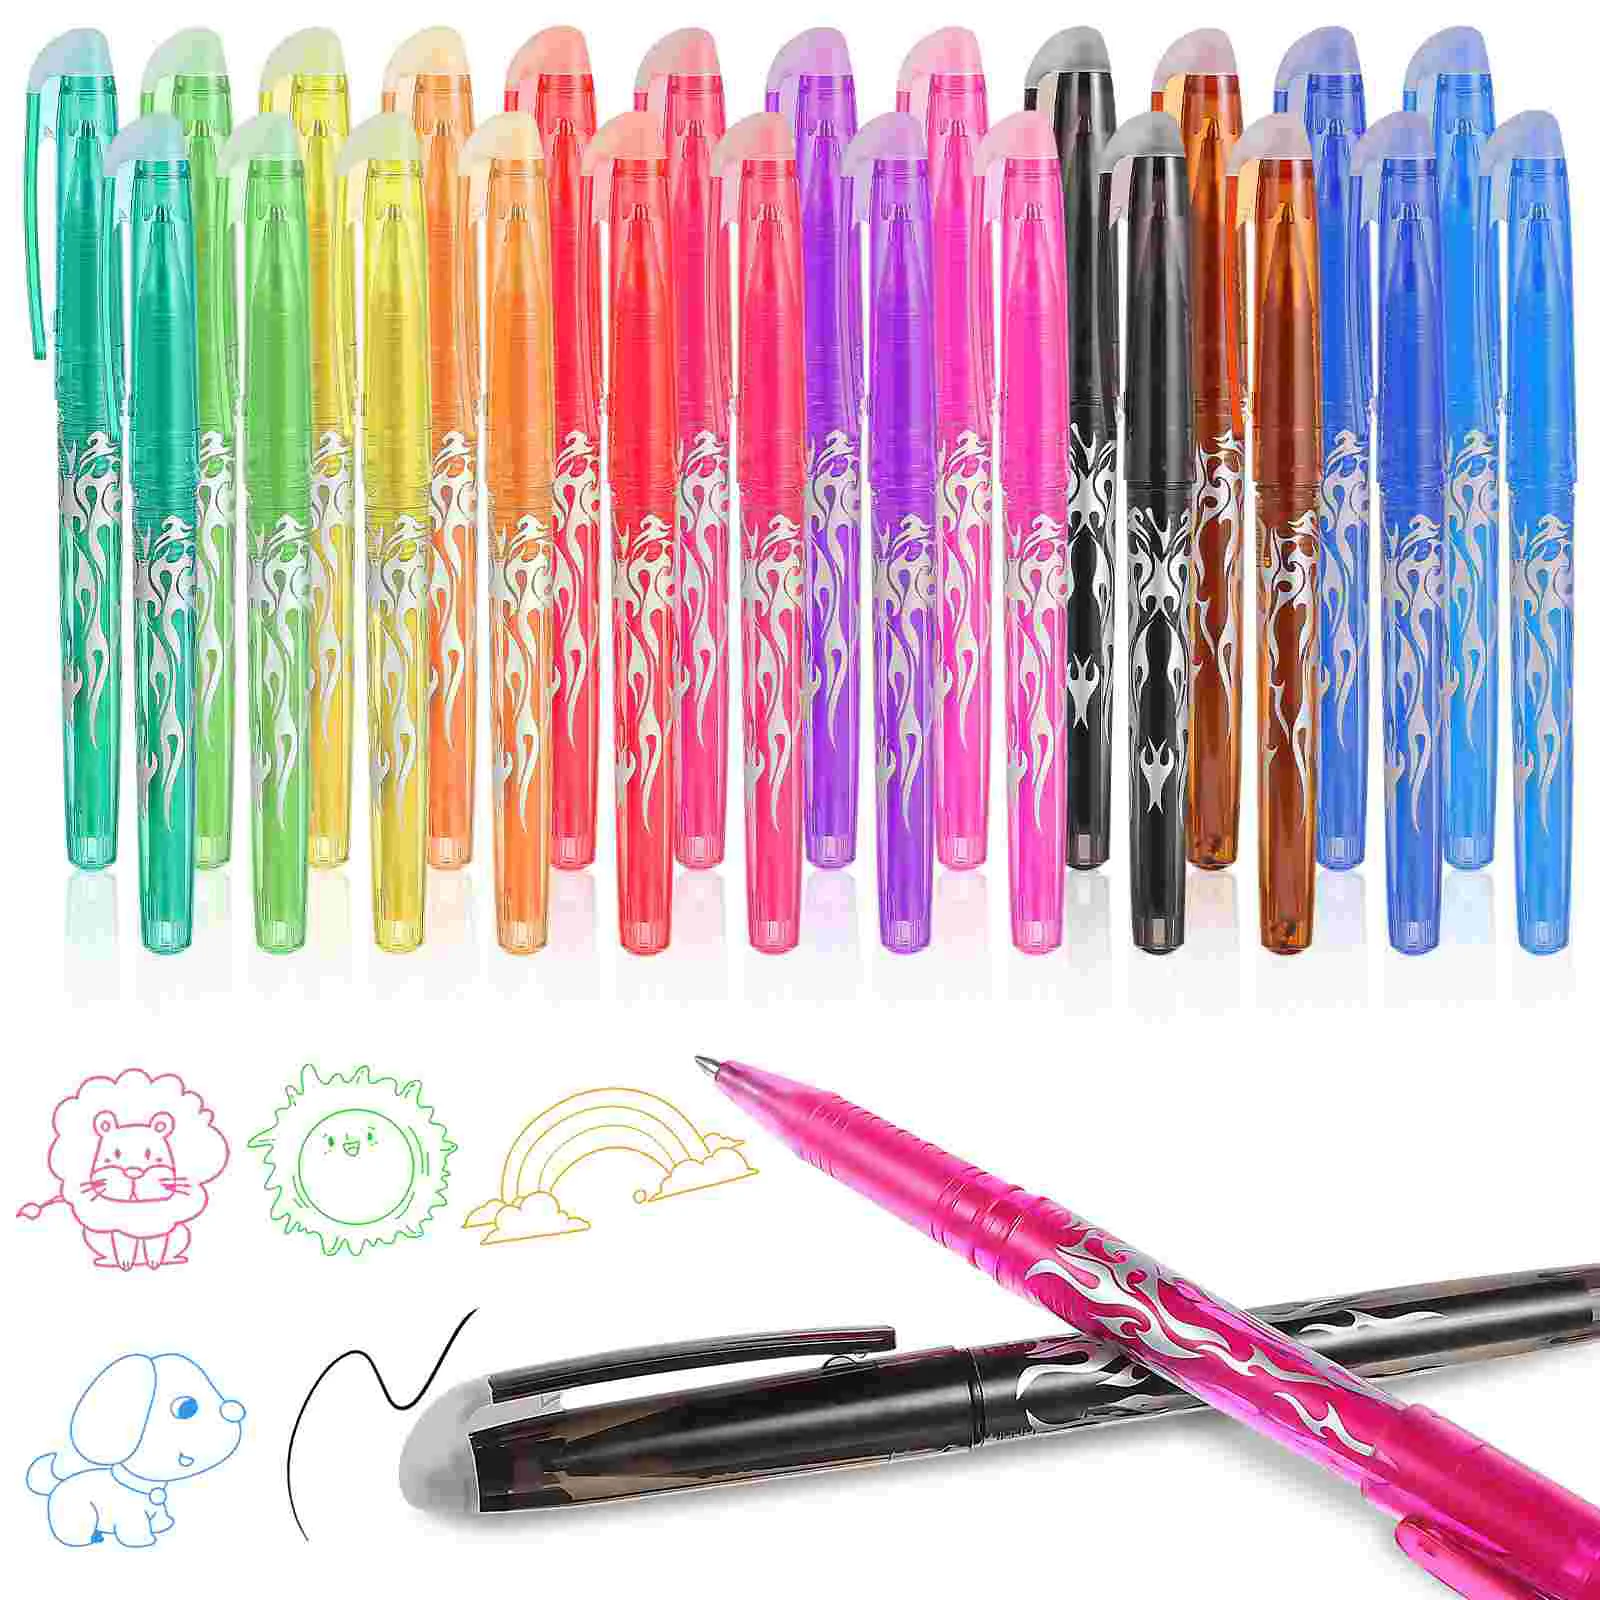 24 Pcs Writing Pens For Kid Creative Signing Pens Writing Pens Student Stationeries School Supplies for Kids